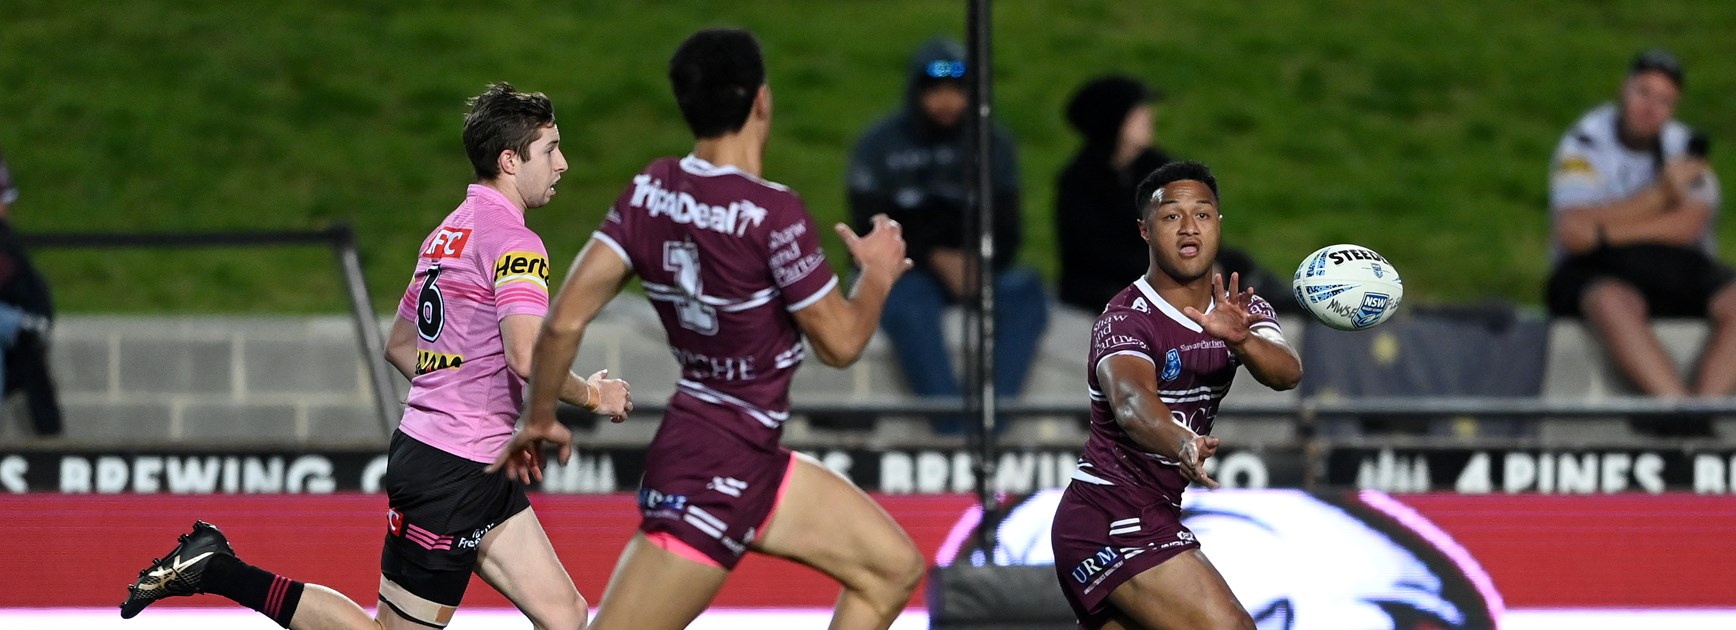 Sea Eagles fly high to upset Panthers in Flegg